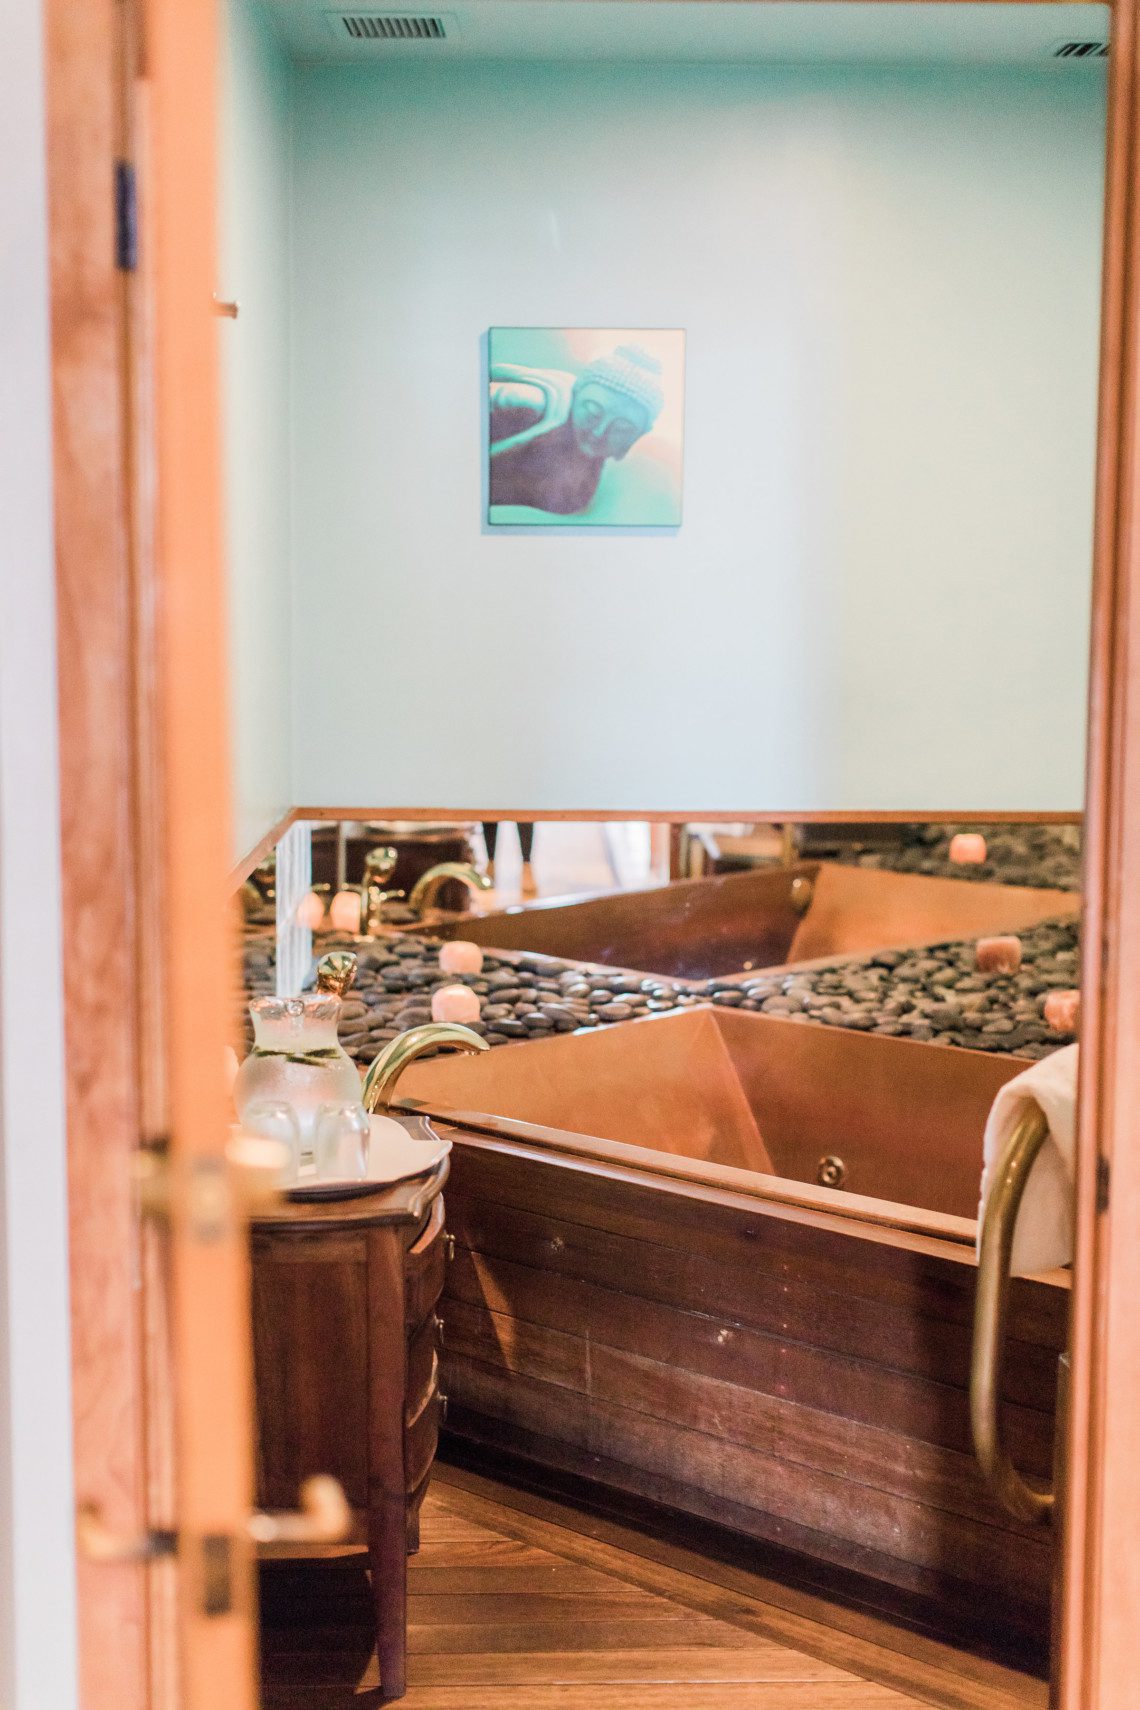 Looking for the best massage in LA? Look no further than Larchmont Sanctuary Spa on Larchmont.